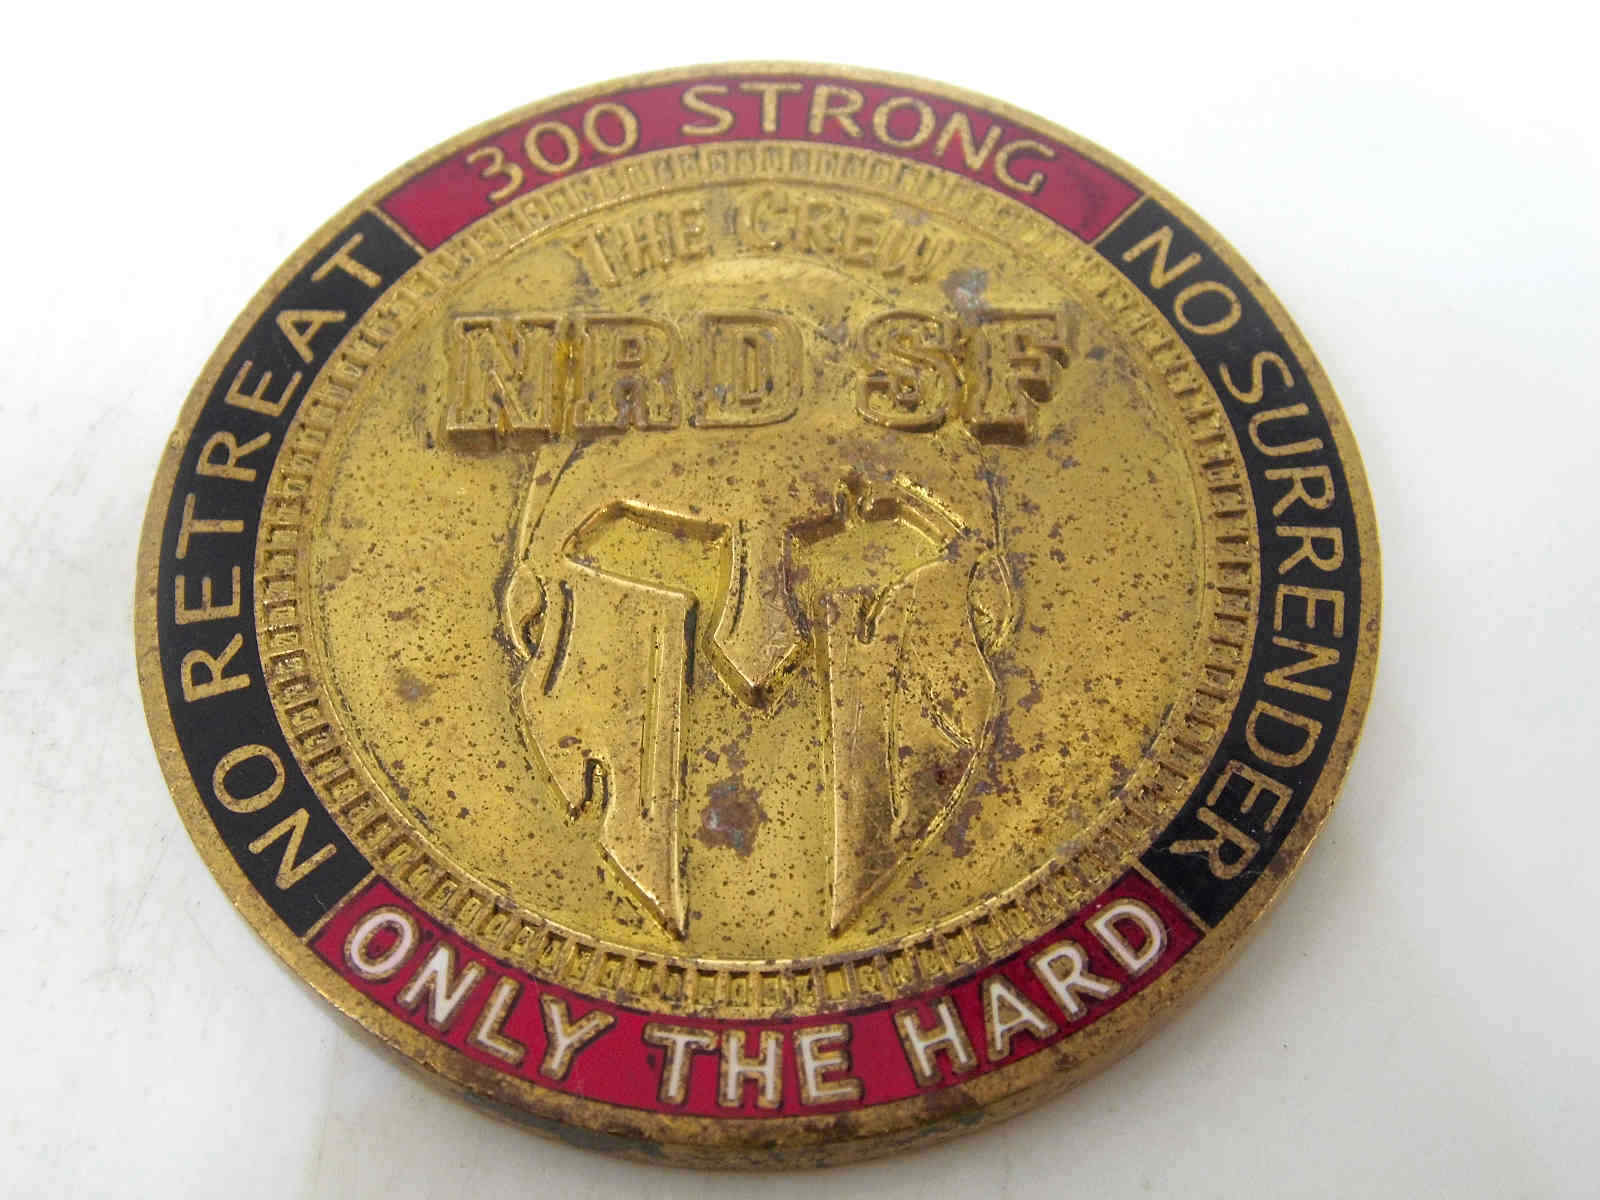 300 STRONG ONLY THE HARD CHALLENGE COIN